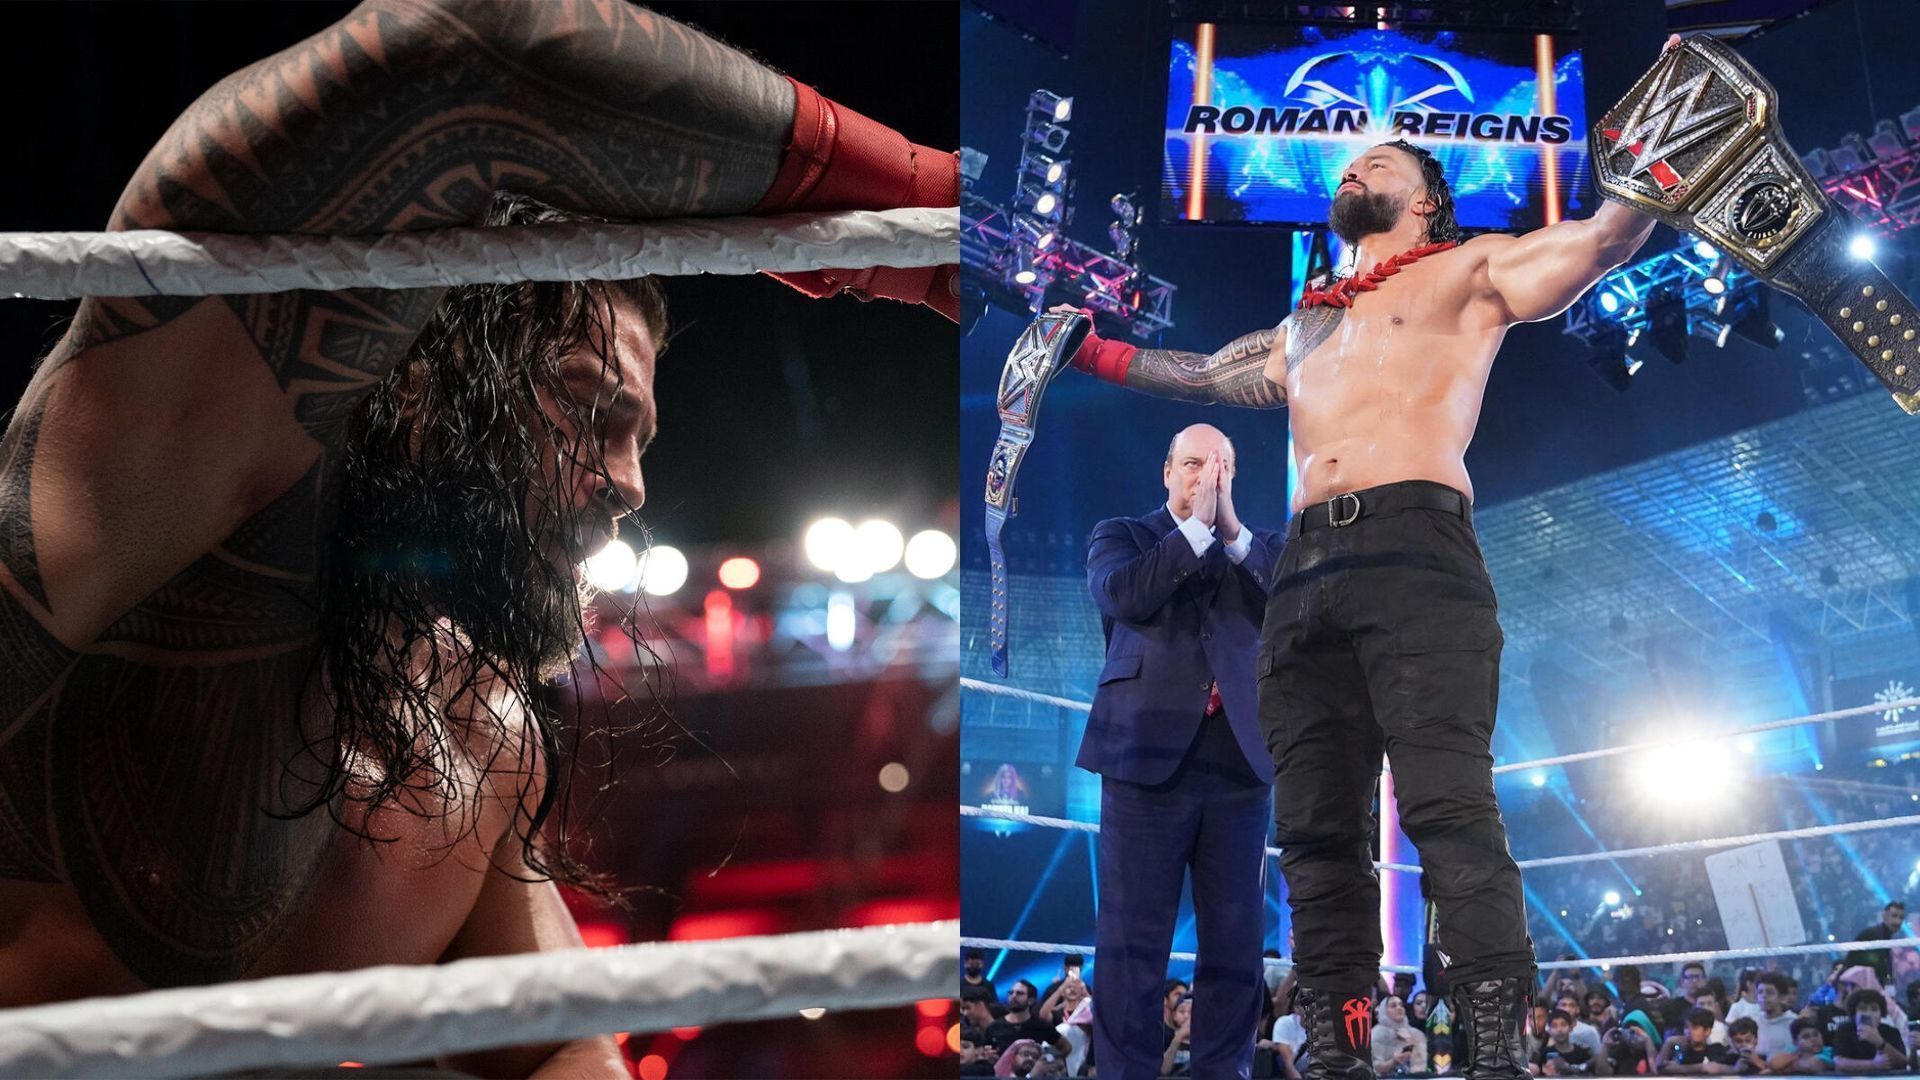 Roman Reigns and The Bloodline will return to WWE television on this week